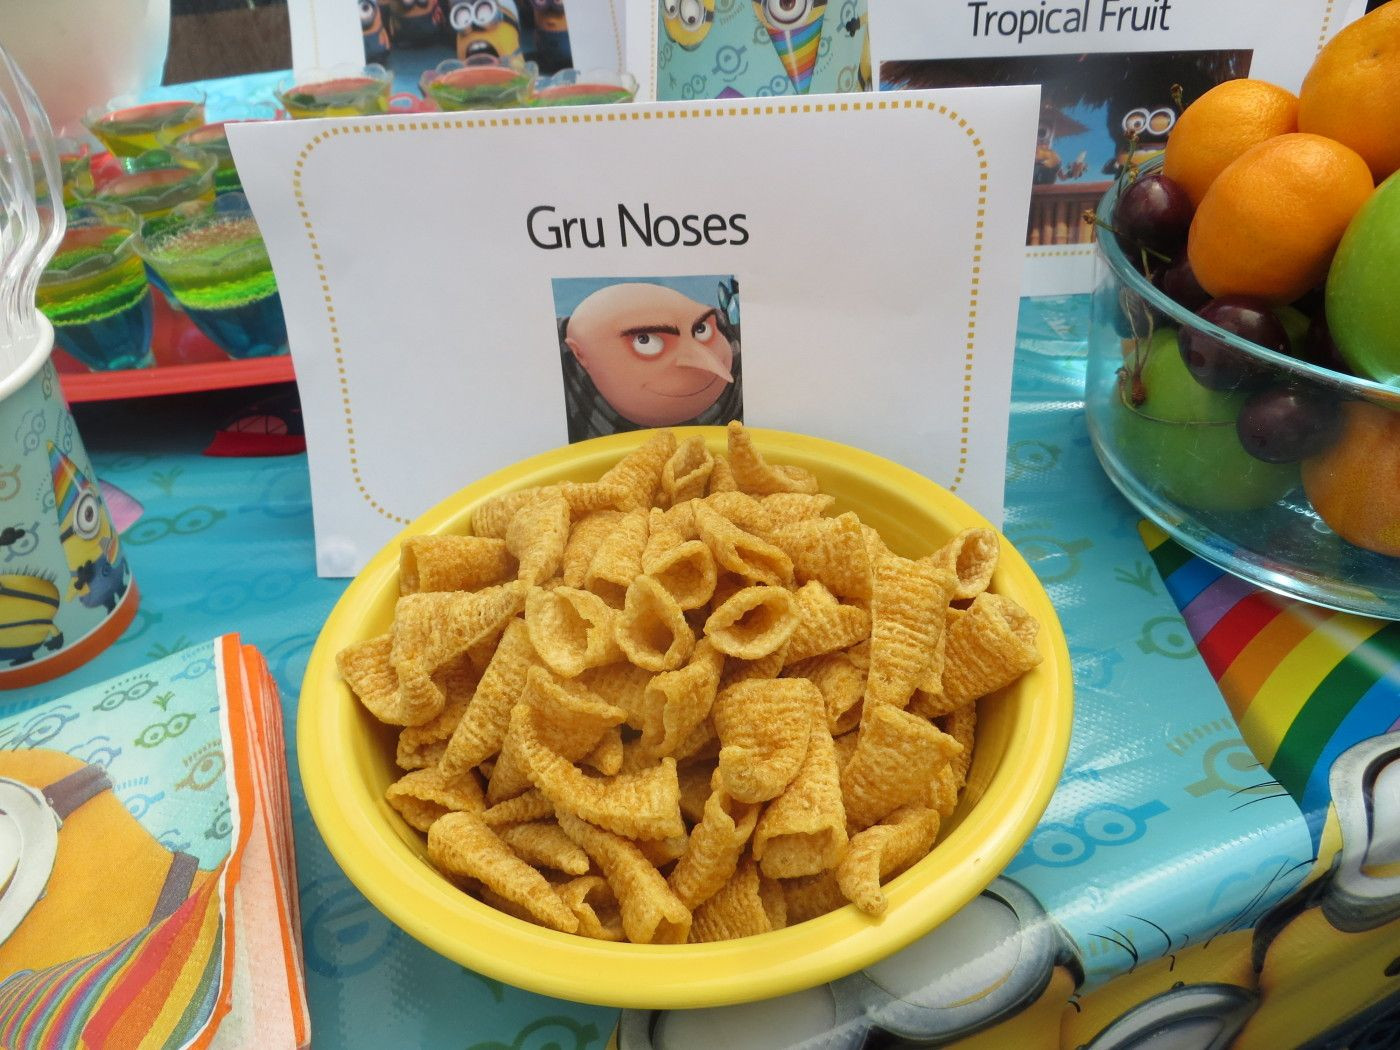 Minion Food Party Ideas
 "Gru Noses" using bugal chips Food Idea for Despicable Me